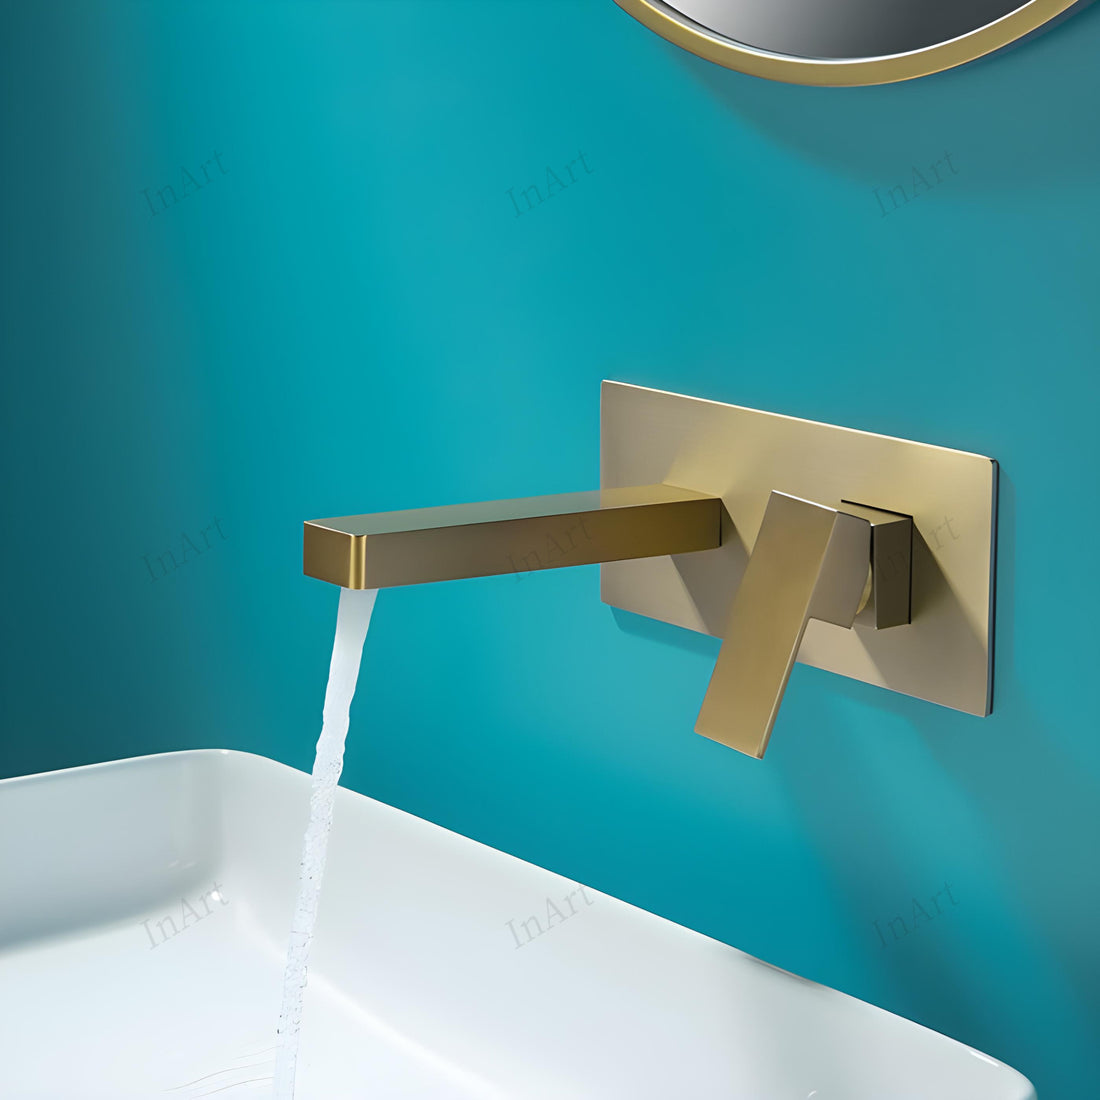 InArt Brushed Gold Wall Mount Single Lever Basin Mixer Tap with Hot & Cold Water, Brushed Gold Finish | Bathroom & Living Room Wall Mounted Faucet WMF007